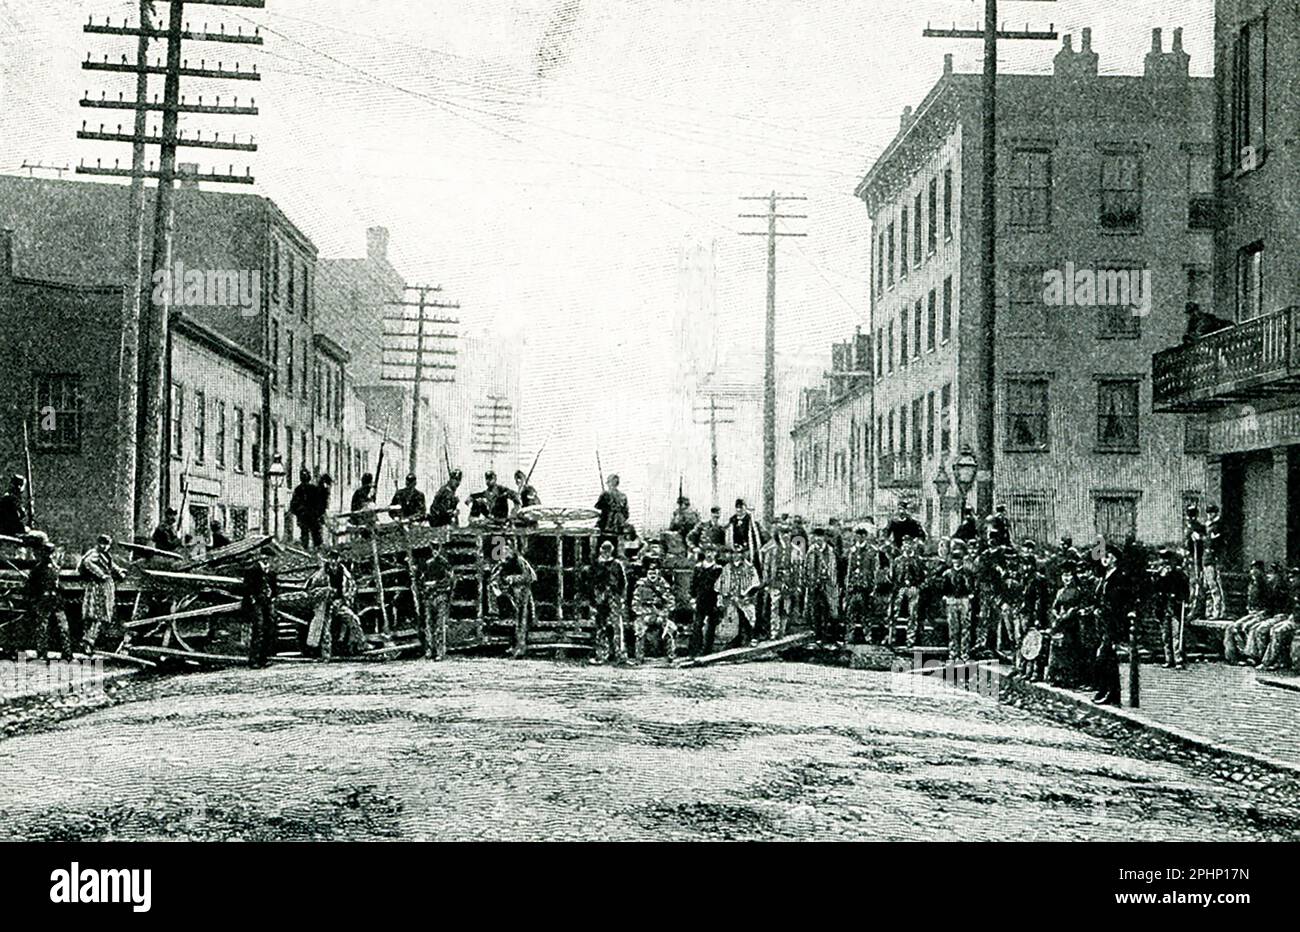 The 1896 caption reads: 'Cincinnati riots of 1884. The Barricade in South Sycamore street  from photograph by Rombach and Groene.' The Cincinnati riots of 1884, also known as the Cincinnati Courthouse riots, were caused by public outrage over the decision of a jury to return a verdict of manslaughter in what was seen as a clear case of murder Stock Photo